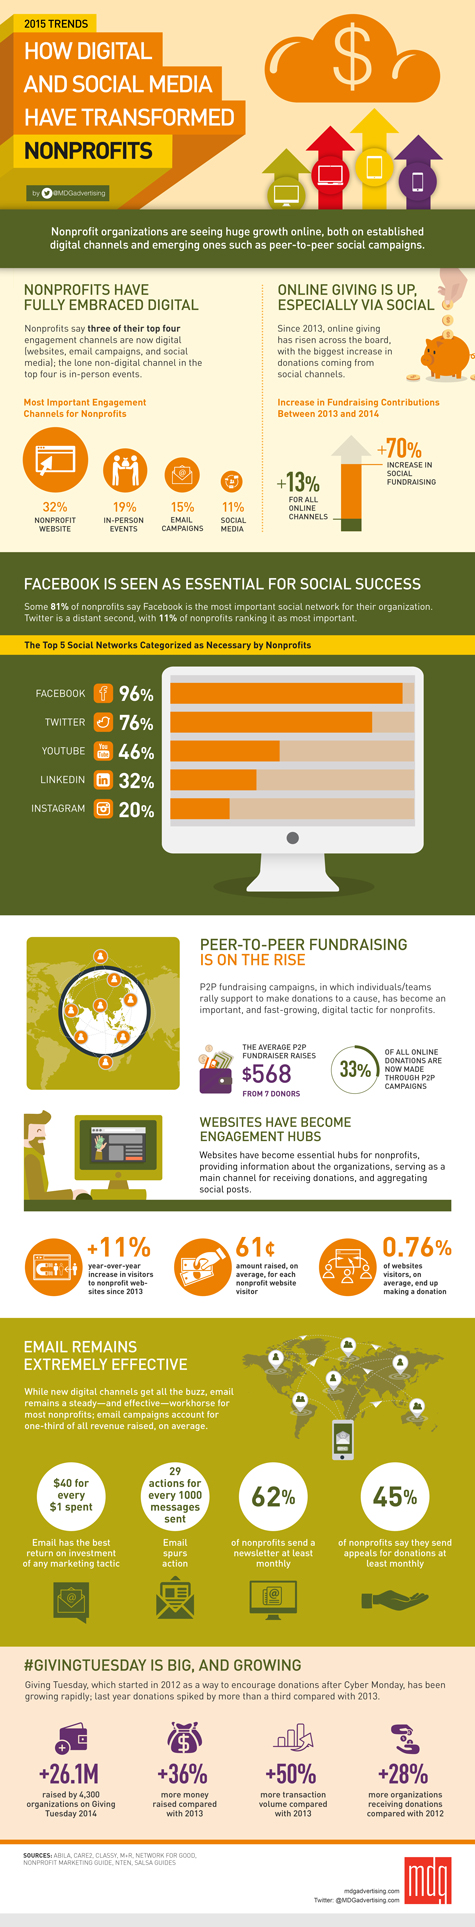 2015 Trends: How Digital and Social Media Have Transformed Nonprofits [Infographic]